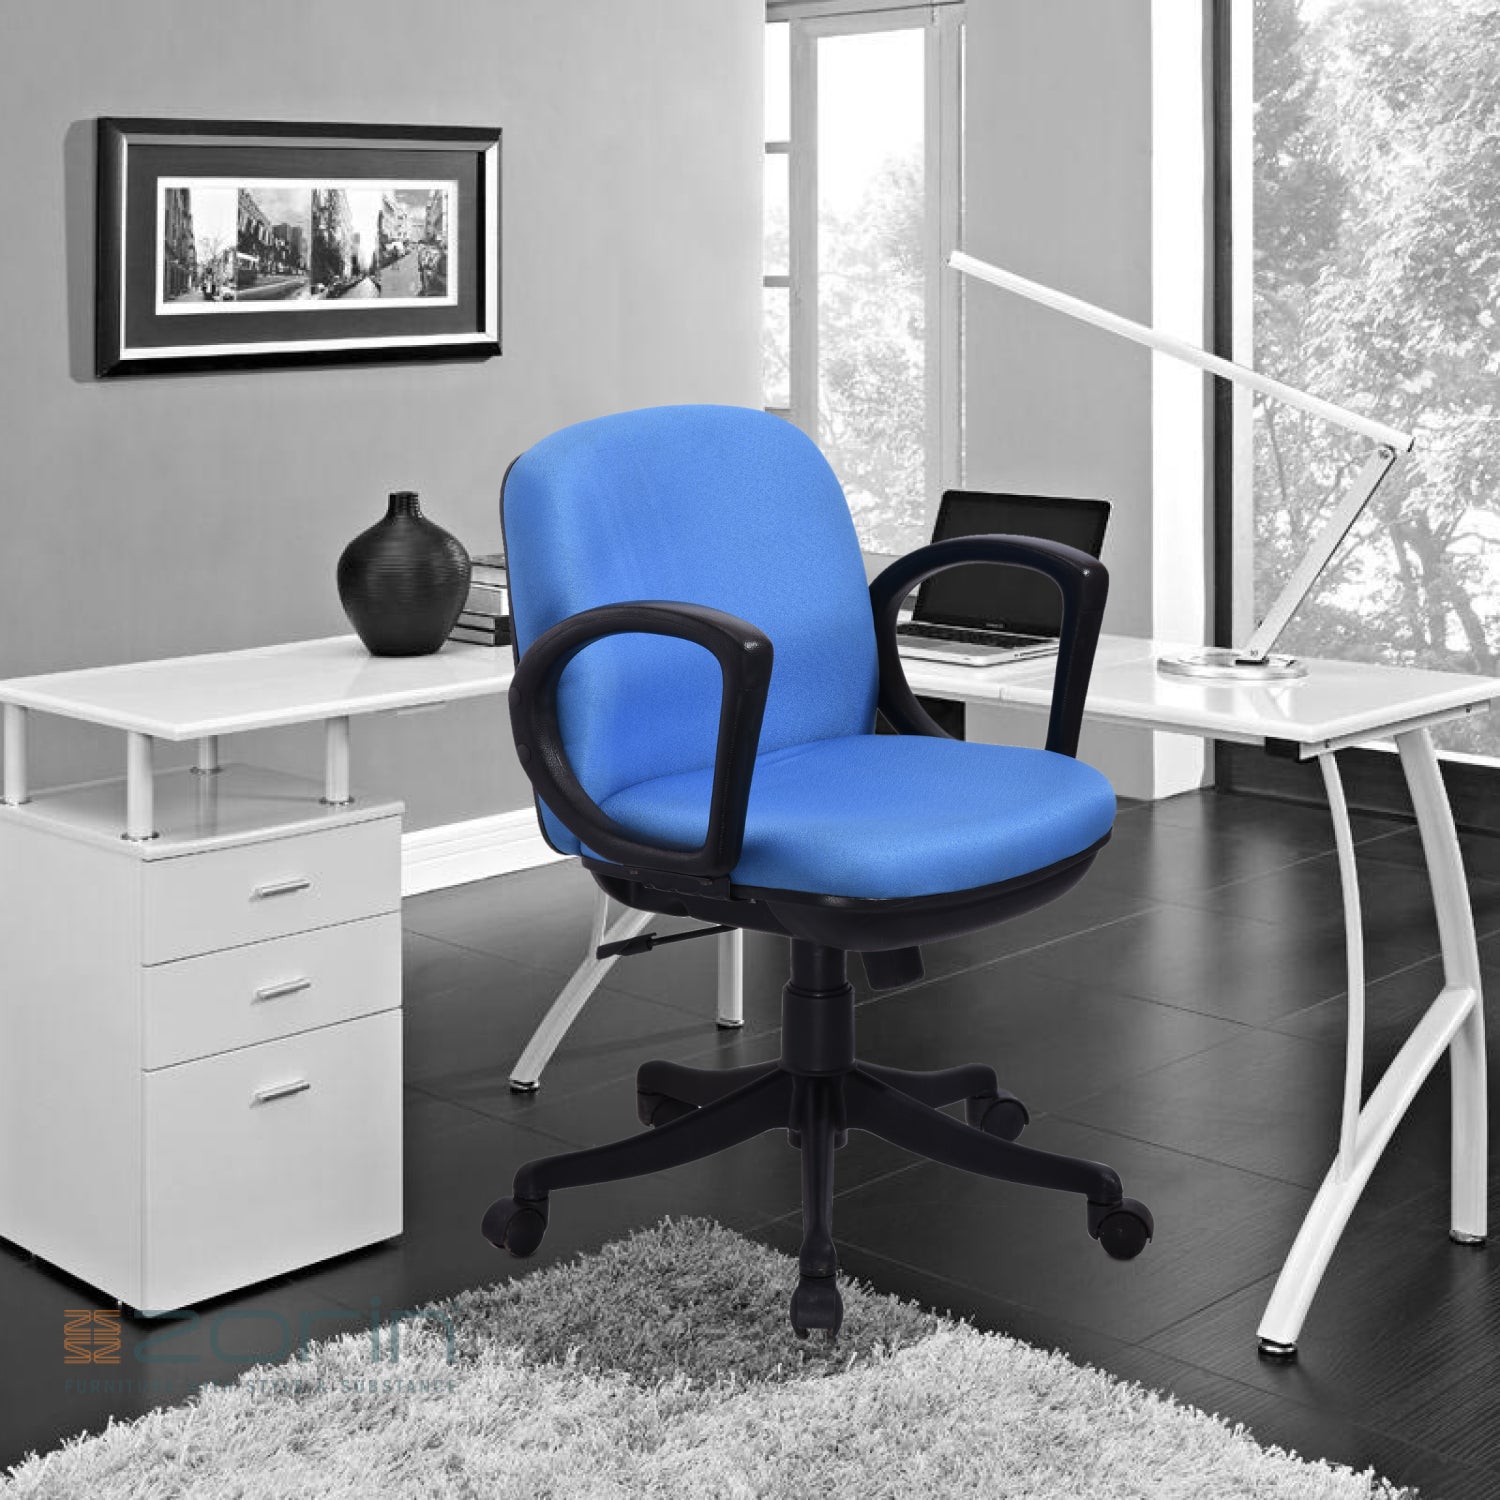 ZSE1027 Medium Back Chair by Zorin in Blue Color Zorin